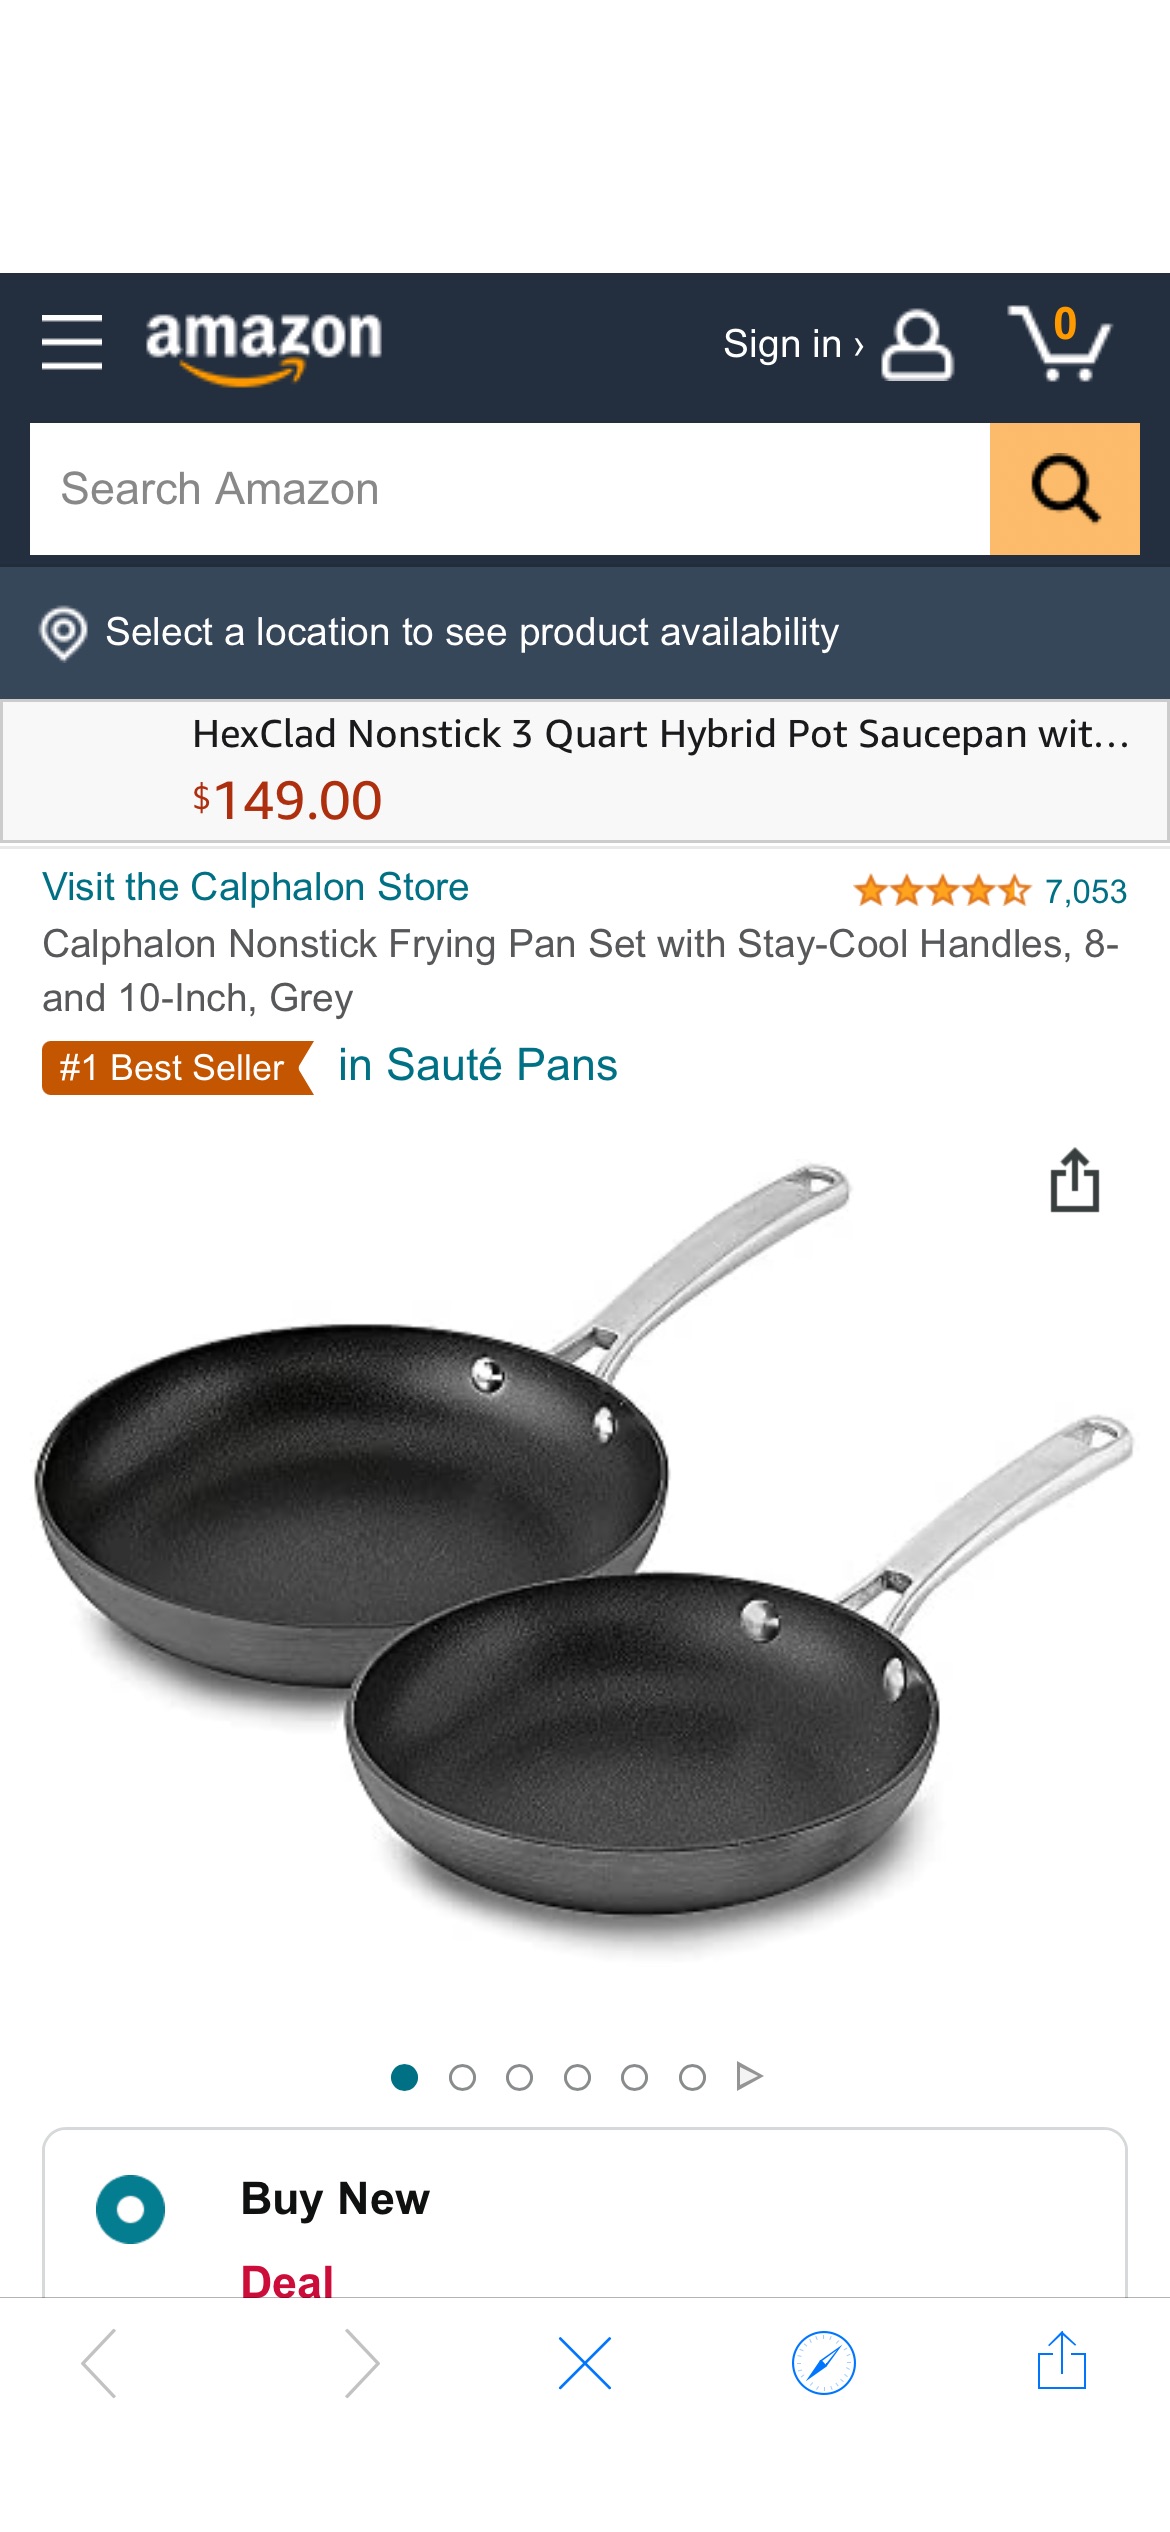 Amazon.com: Calphalon Nonstick Frying Pan Set with Stay-Cool Handles, 8- and 10-Inch, Grey: Home & Kitchen